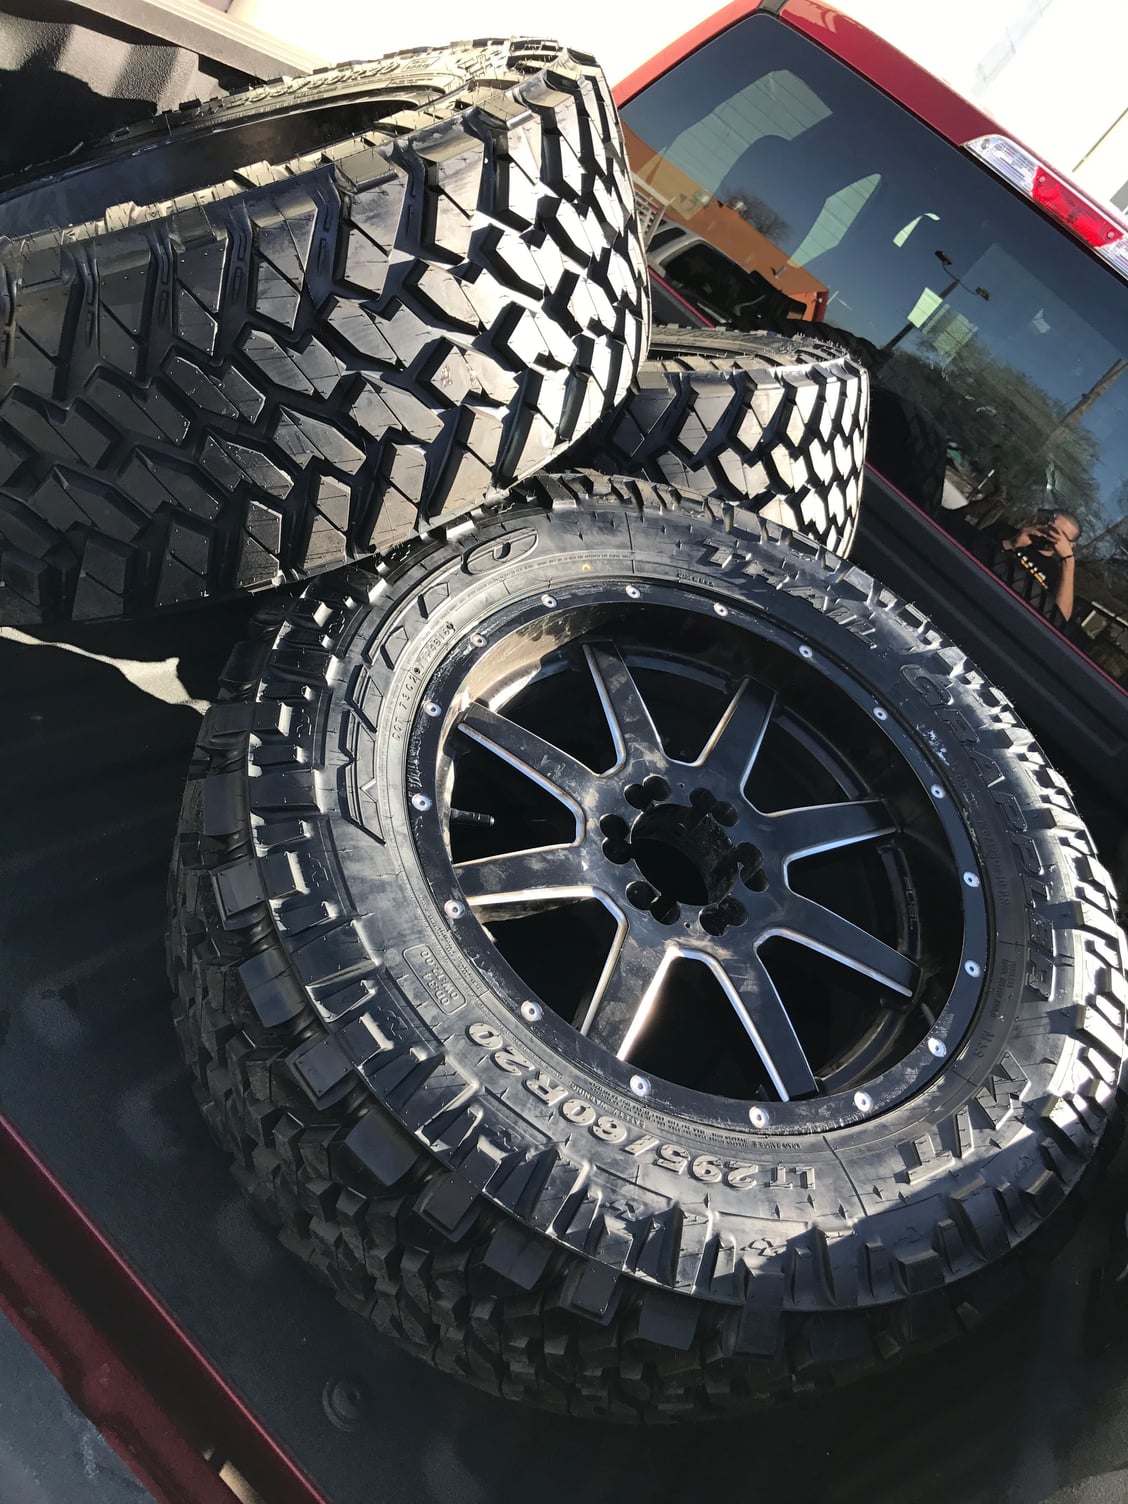 285/65r18 trail grapplers or 295/70r18? 